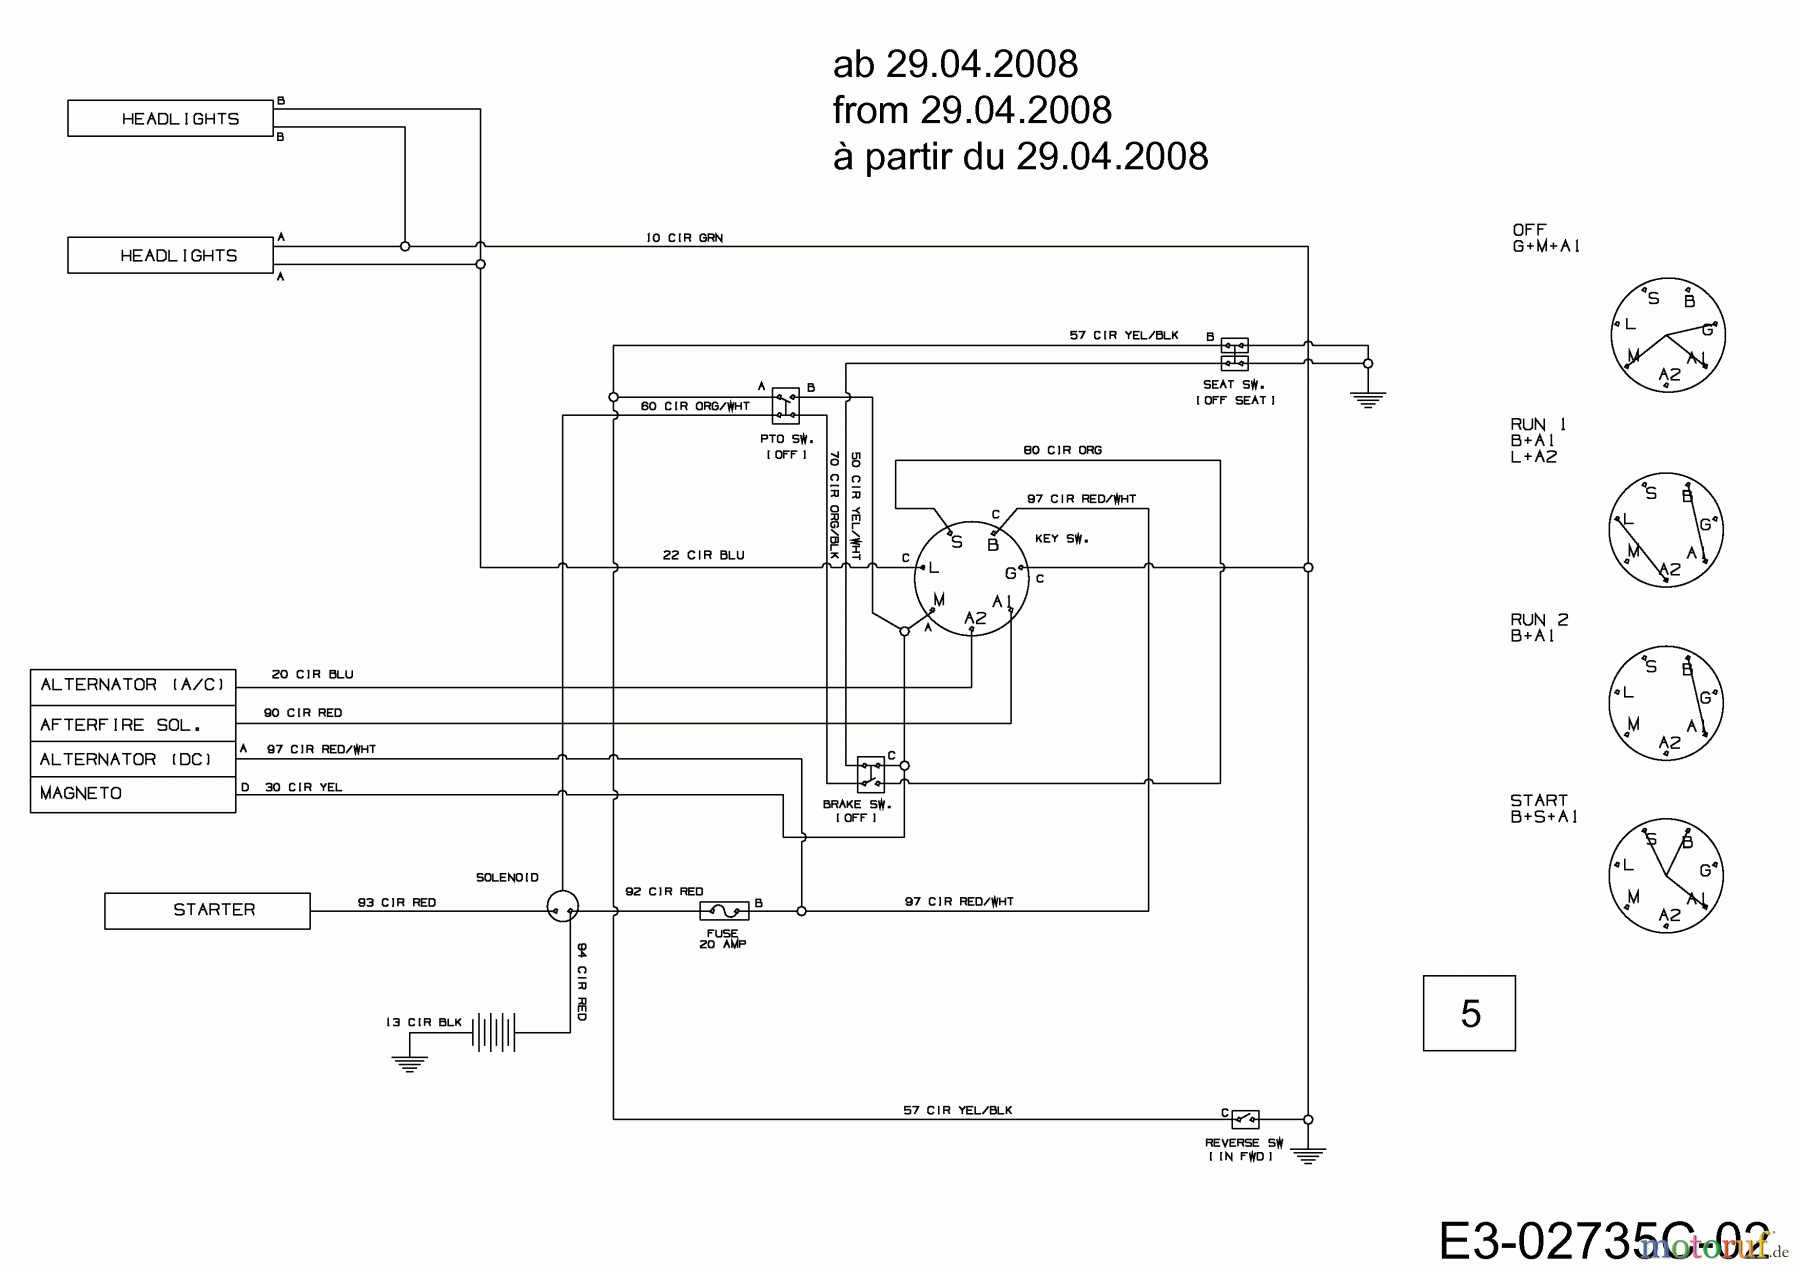  Black Edition Lawn tractors 155/107 T 13AM760G615  (2009) Wiring diagram from 29.04.2008